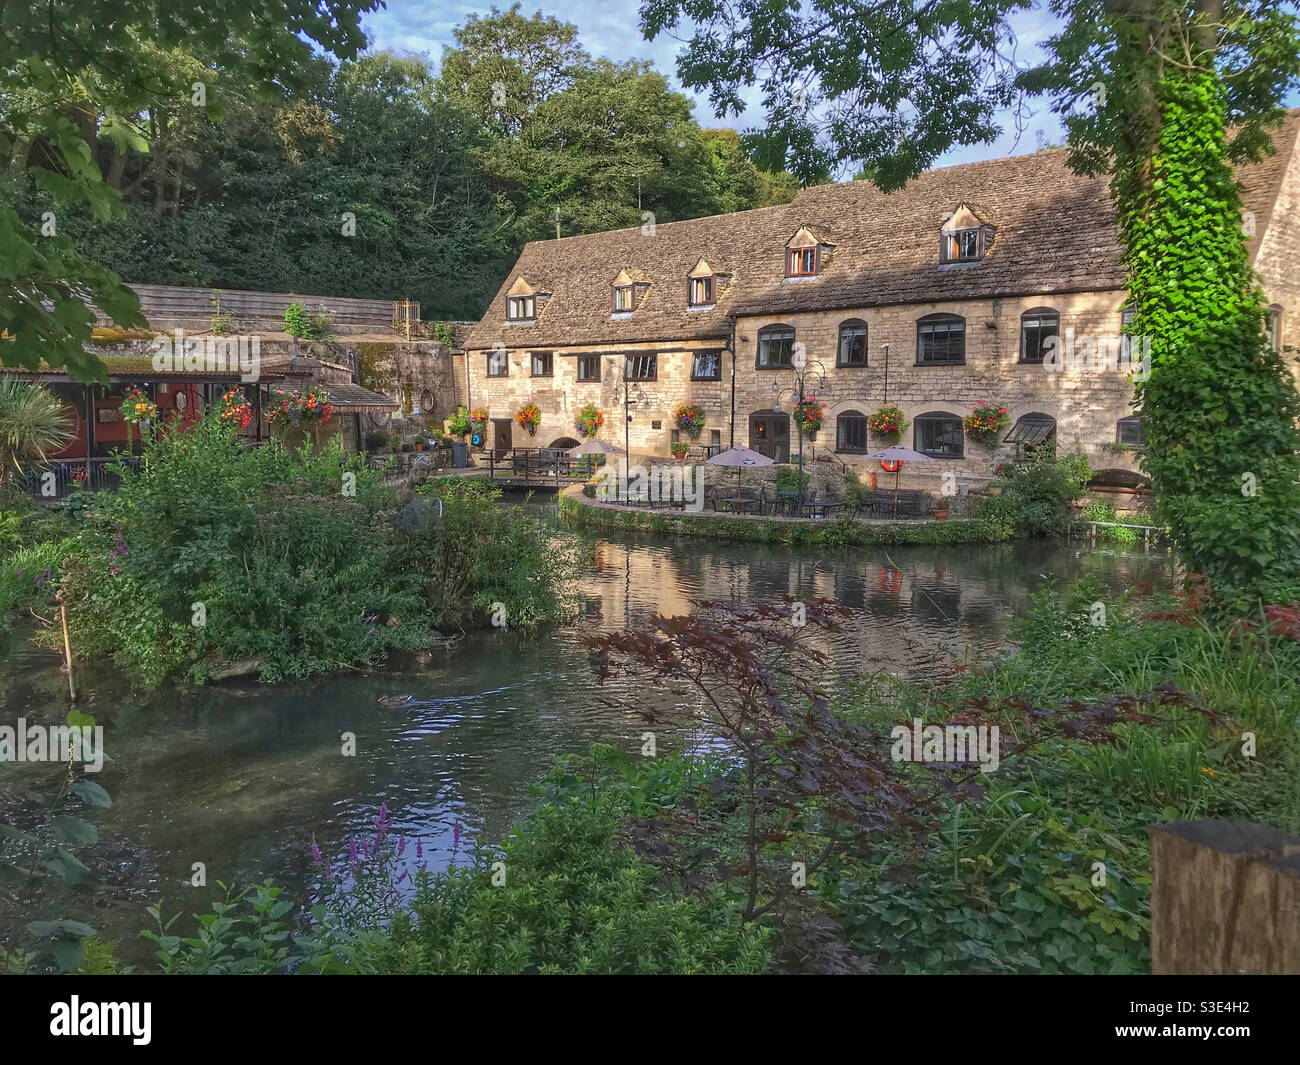 Egypt Mill Hotel and Restaurant in Nailsworth, near Stroud, Gloucestershire, England. Stock Photo